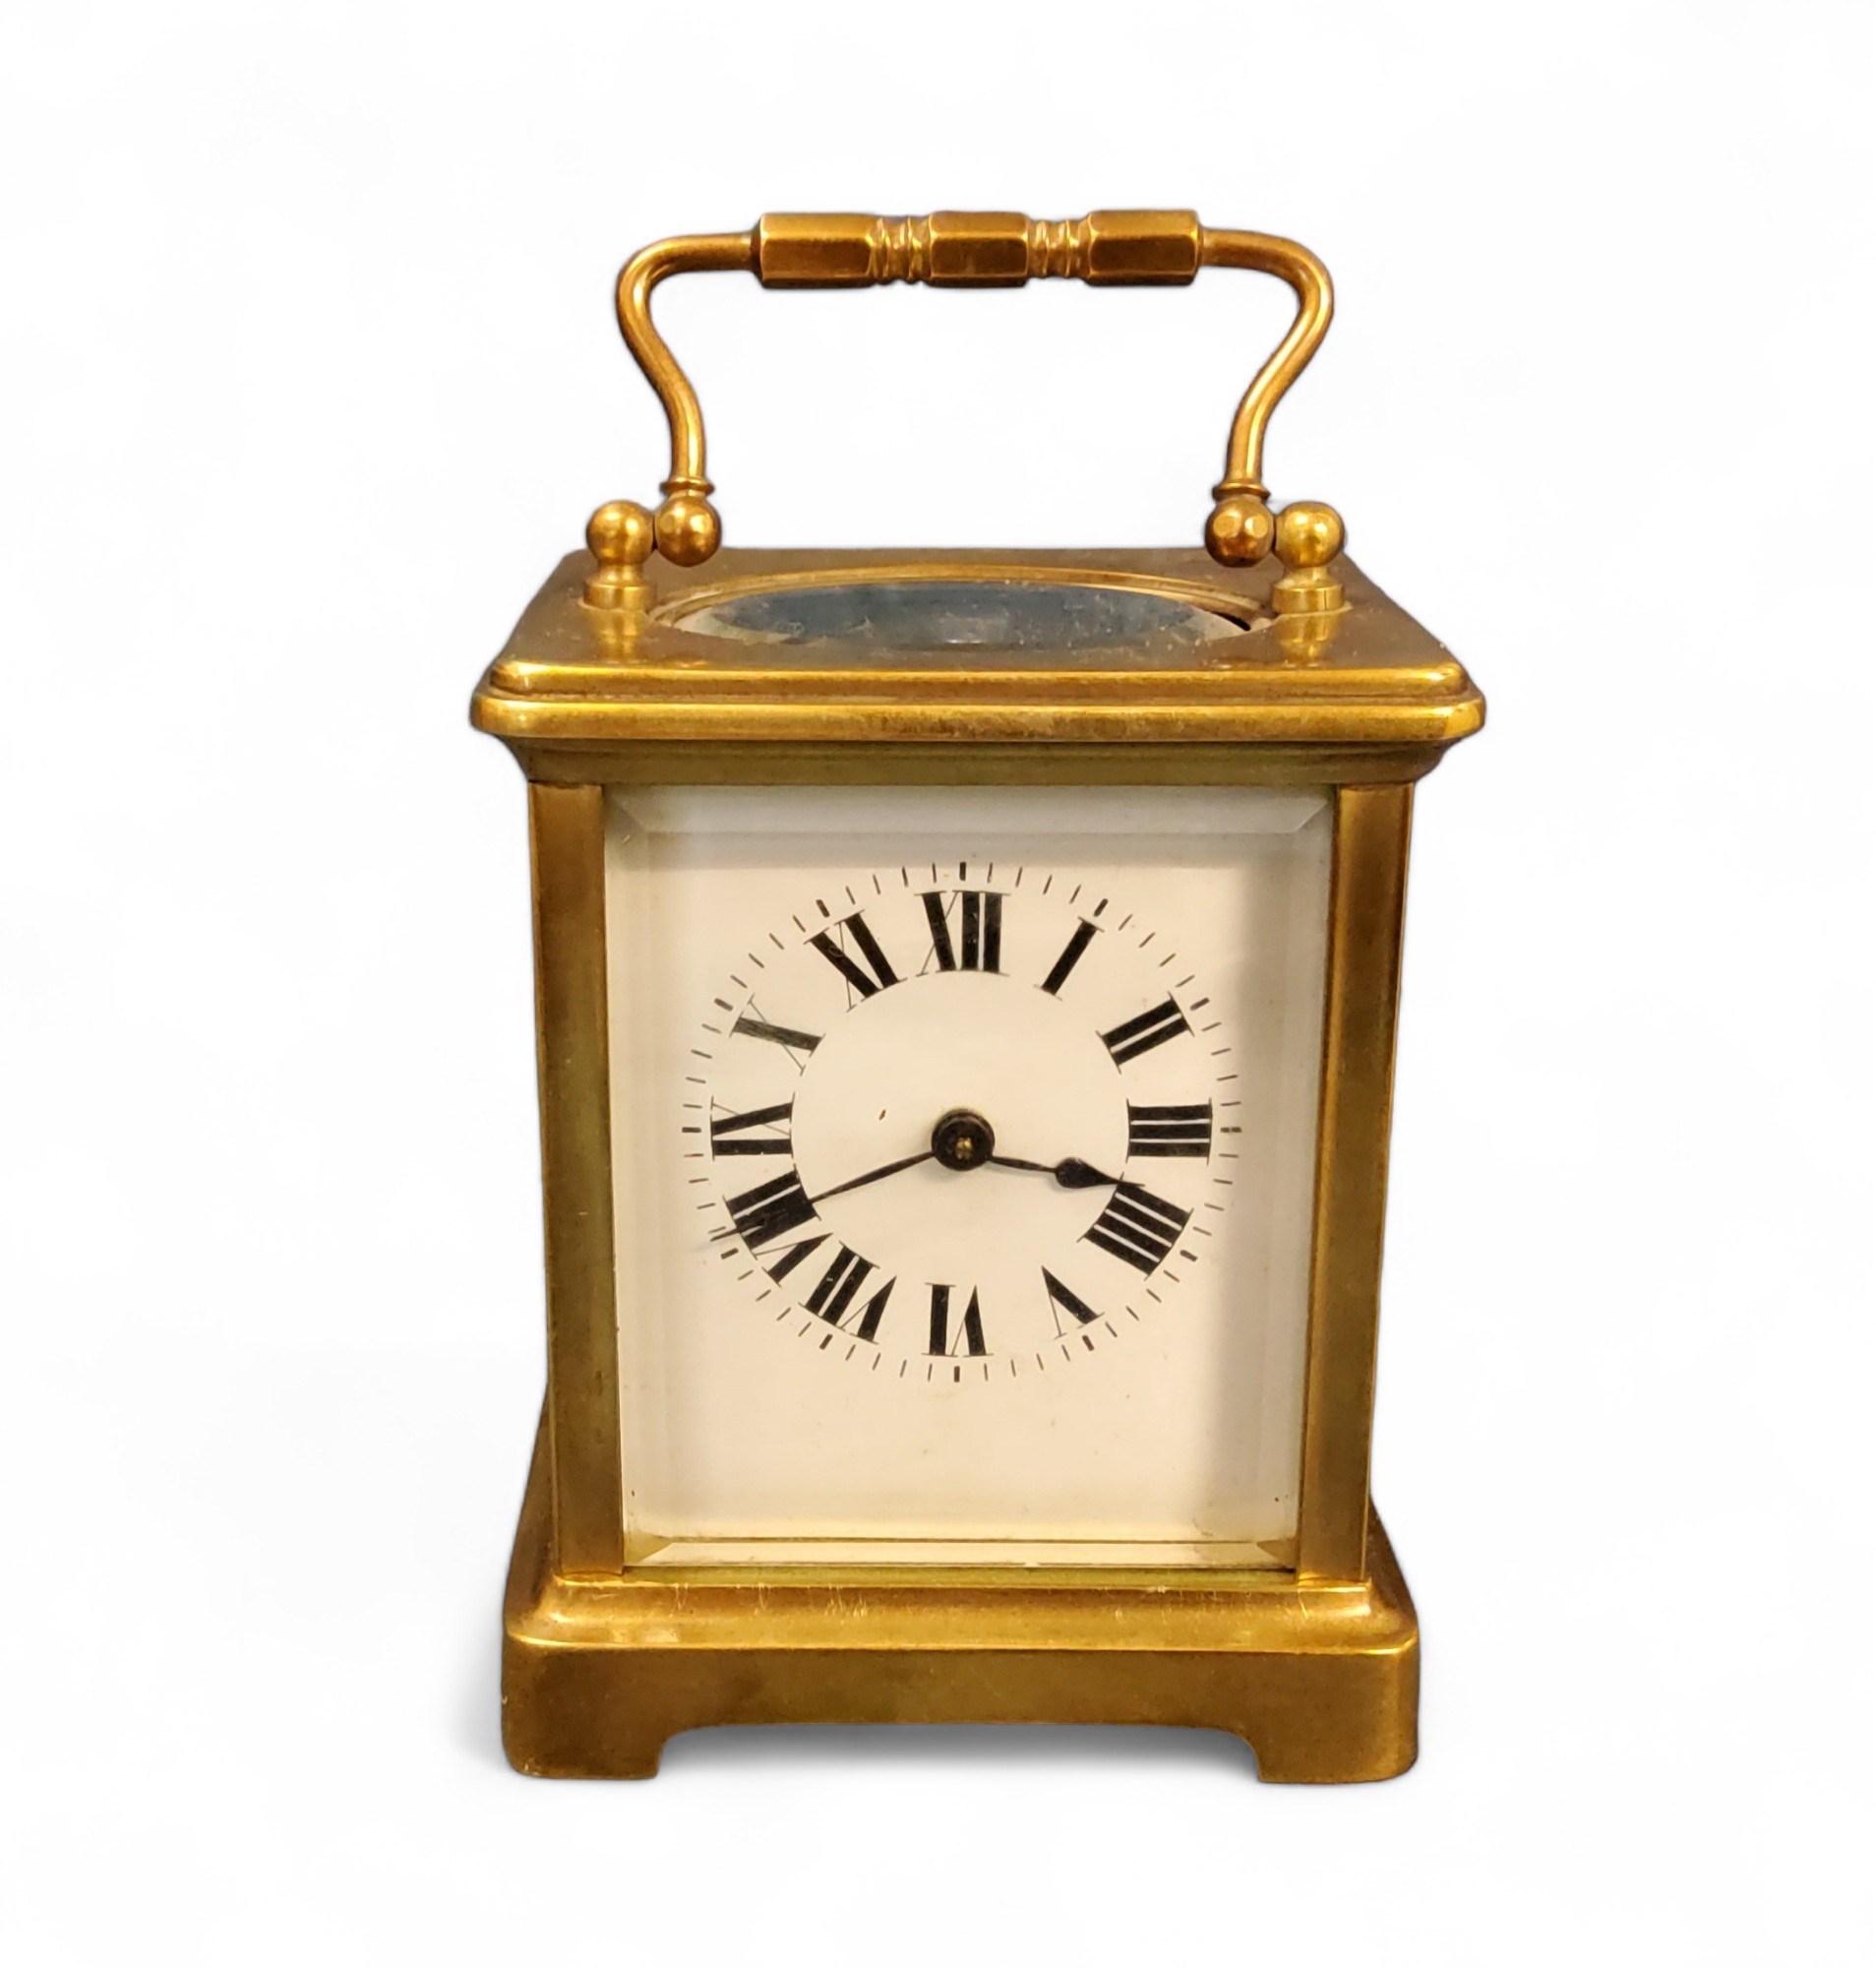 A 20th century brass carriage clock, Roman numerals, swing handle, 10cm high